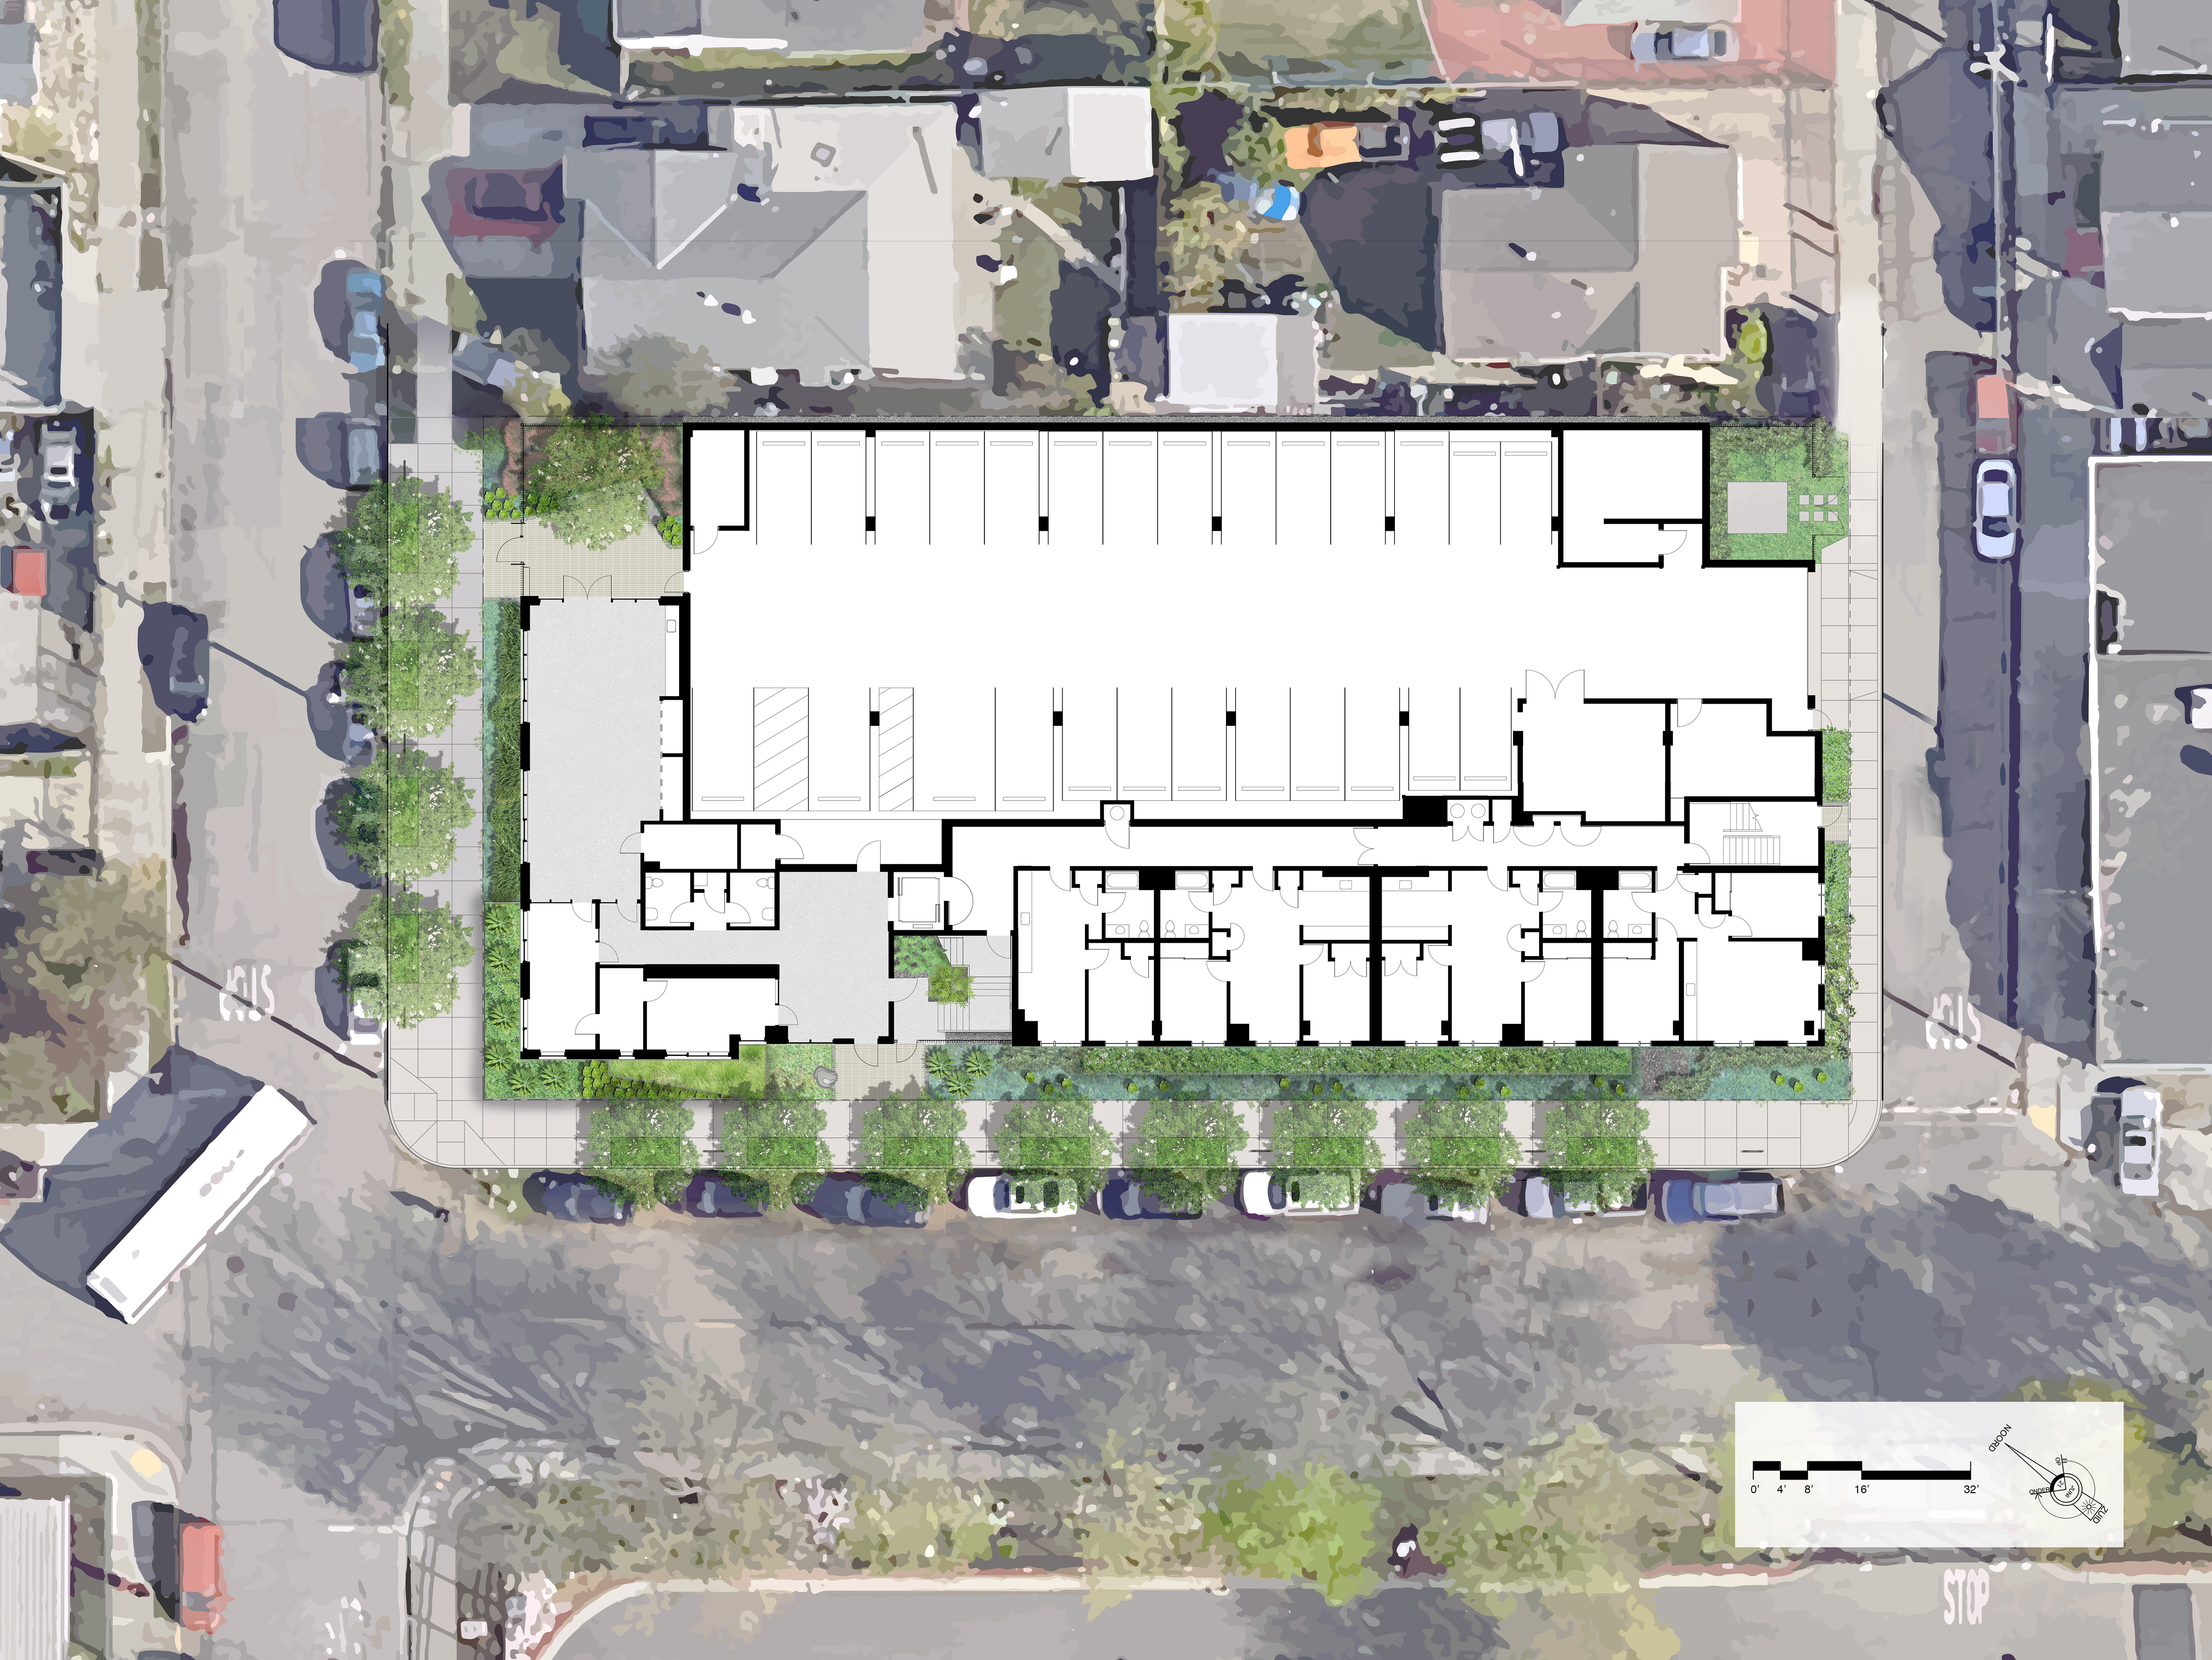 Ground level site plan for Coliseum Place, affordable housing in Oakland, Ca.